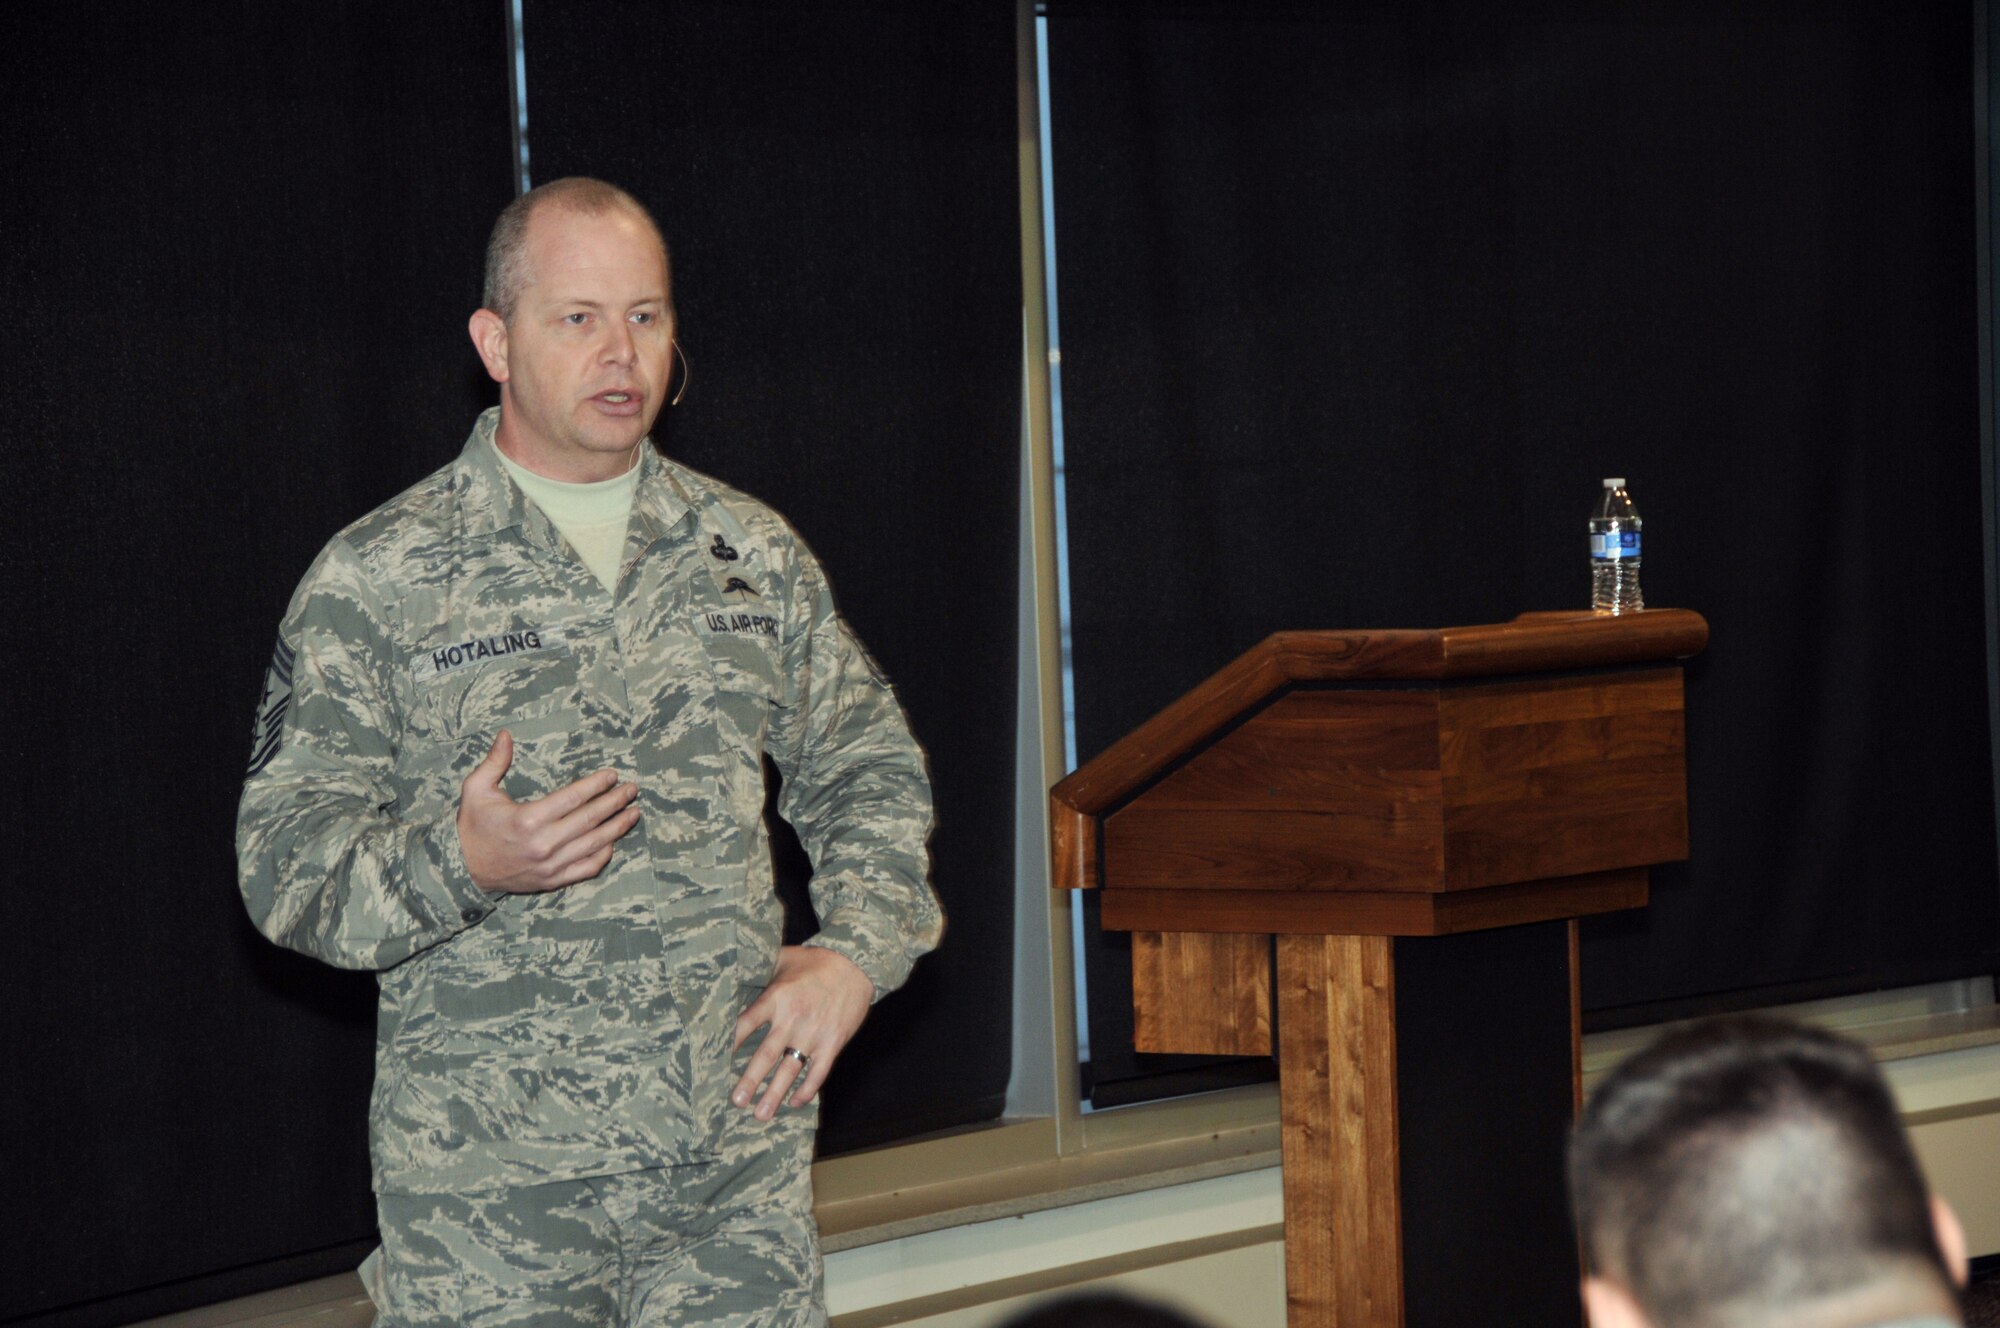 Chief Master Sgt. James Hotaling, Air National Guard Command Chief, speaks during a town hall meeting Jan. 10, 2014 at Ohio’s Springfield Air National Guard Base.  Hotaling held the town hall meeting as part of a tour of the Ohio Air National Guard units. (U.S. Air National Guard Photo by Master Sgt. Seth Skidmore)